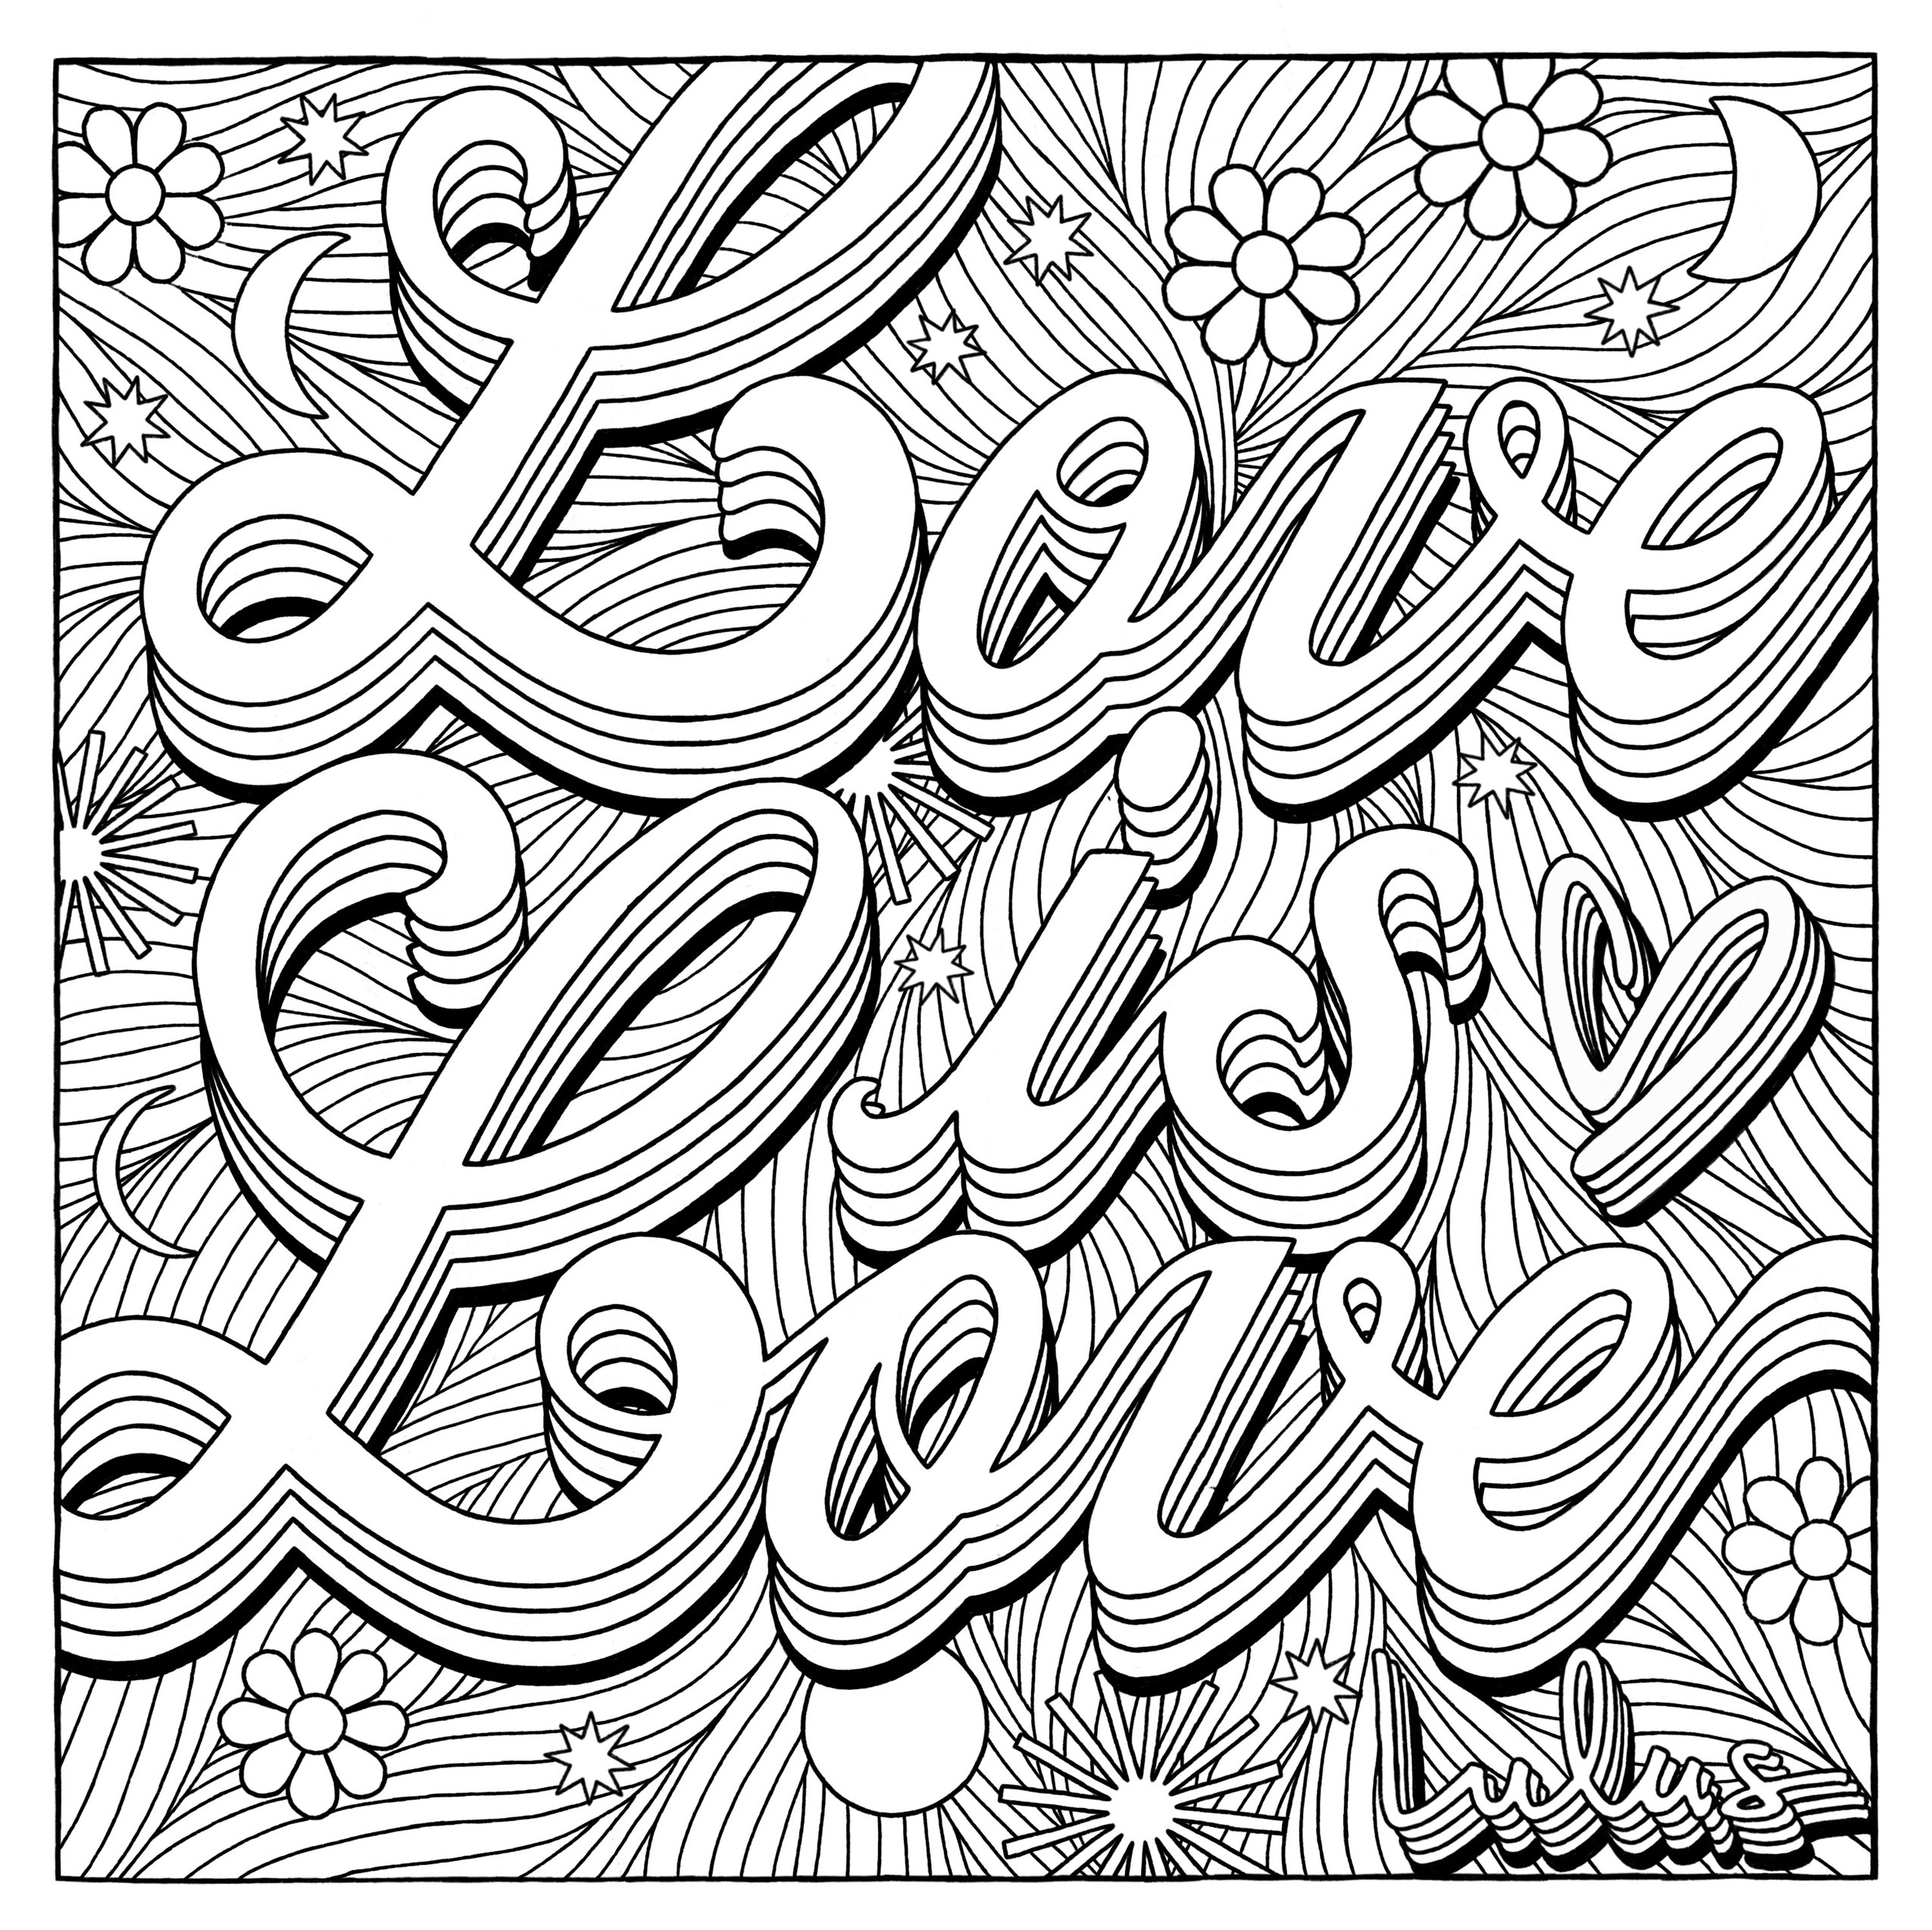 Print Adult Coloring Pages for Free - Lulus.com Fashion Blog